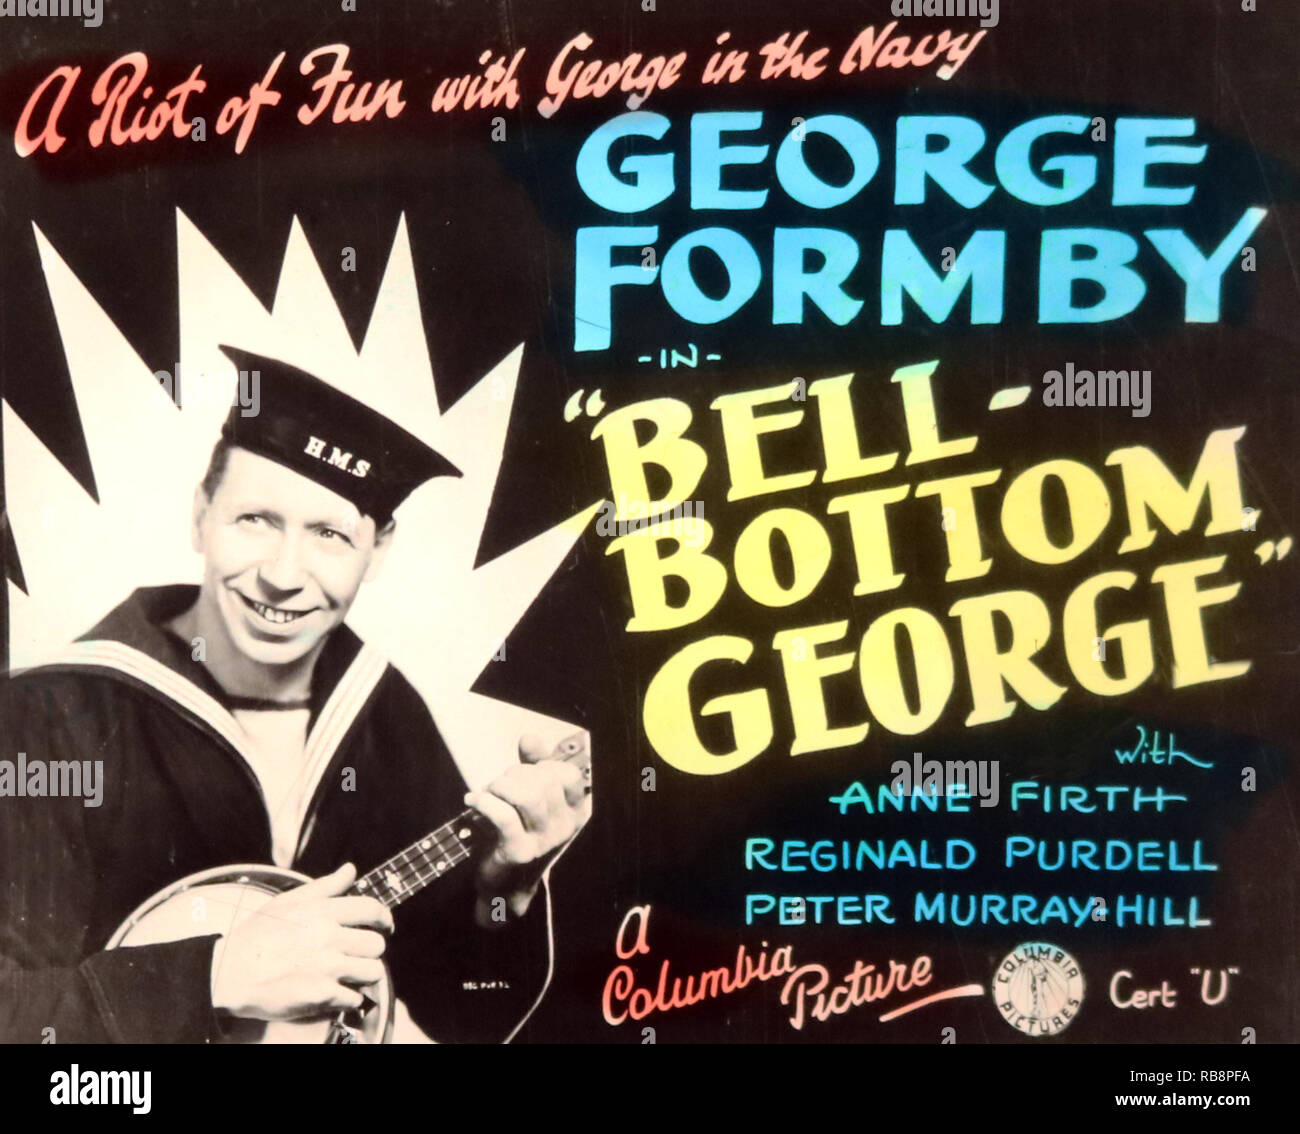 George Formby 'Bell Bottom George' movie advertisement Stock Photo